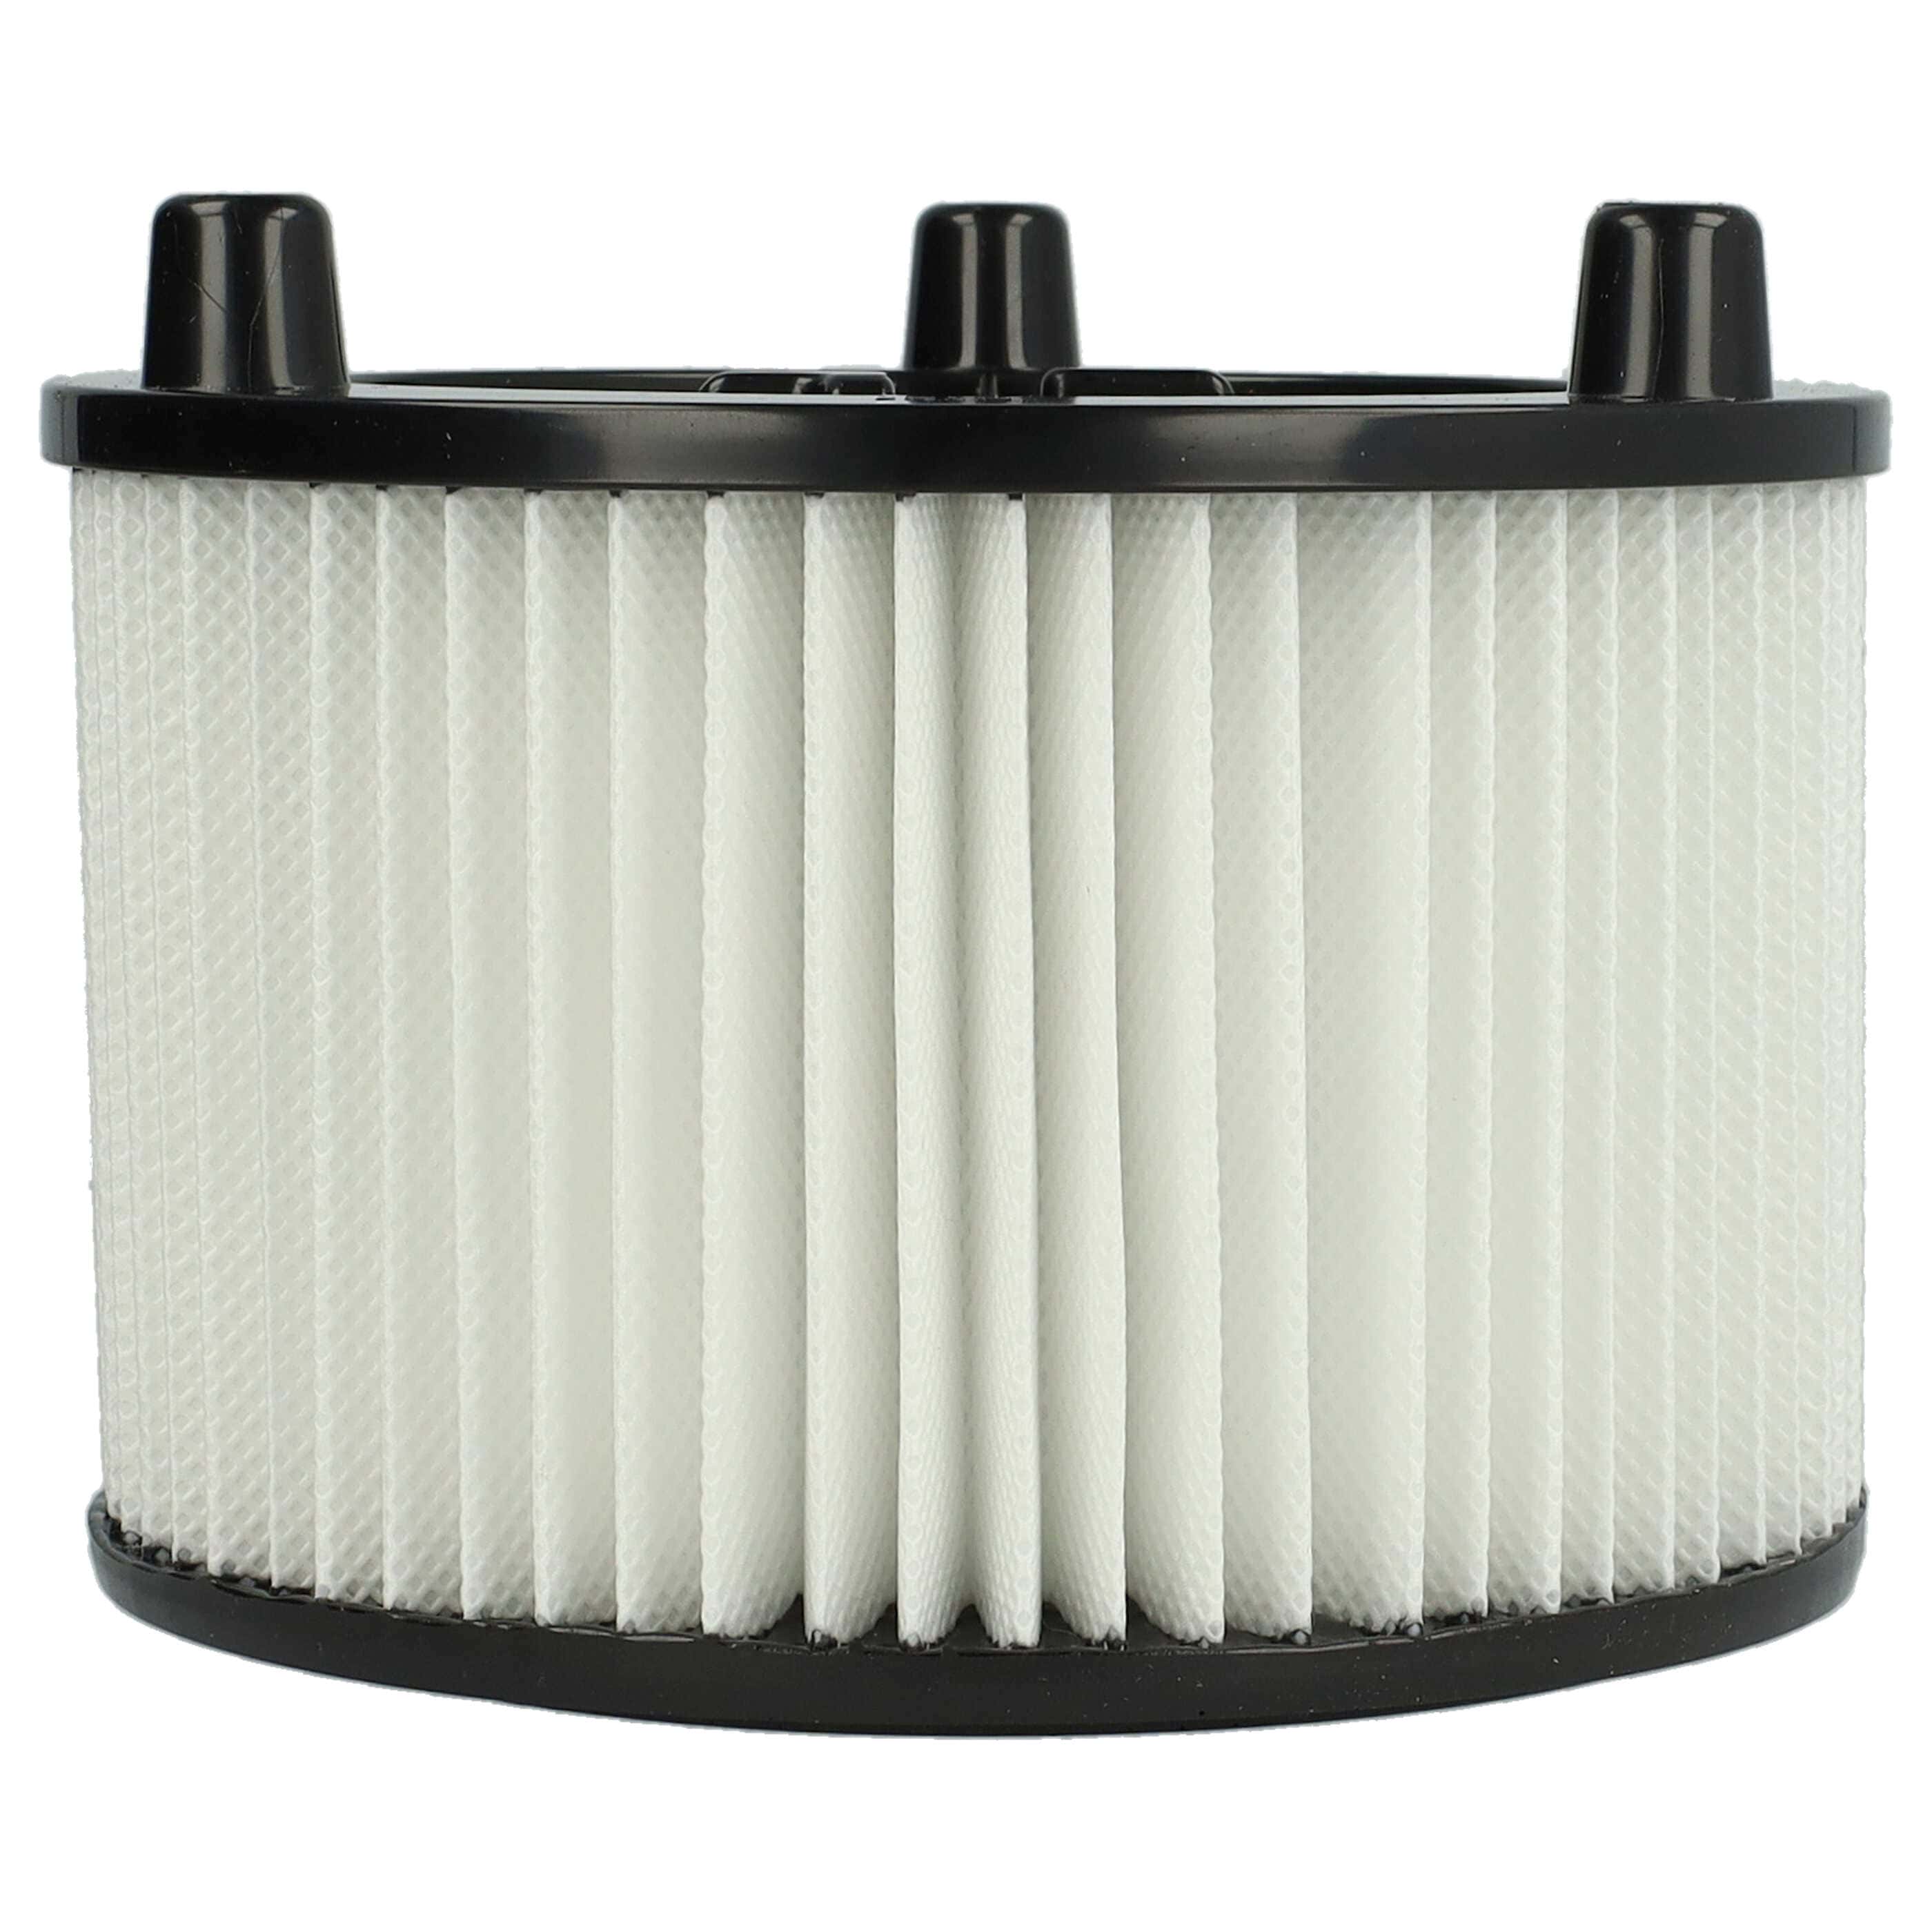 1x cartridge filter replaces Bosch 2609256F35 for BoschVacuum Cleaner, white